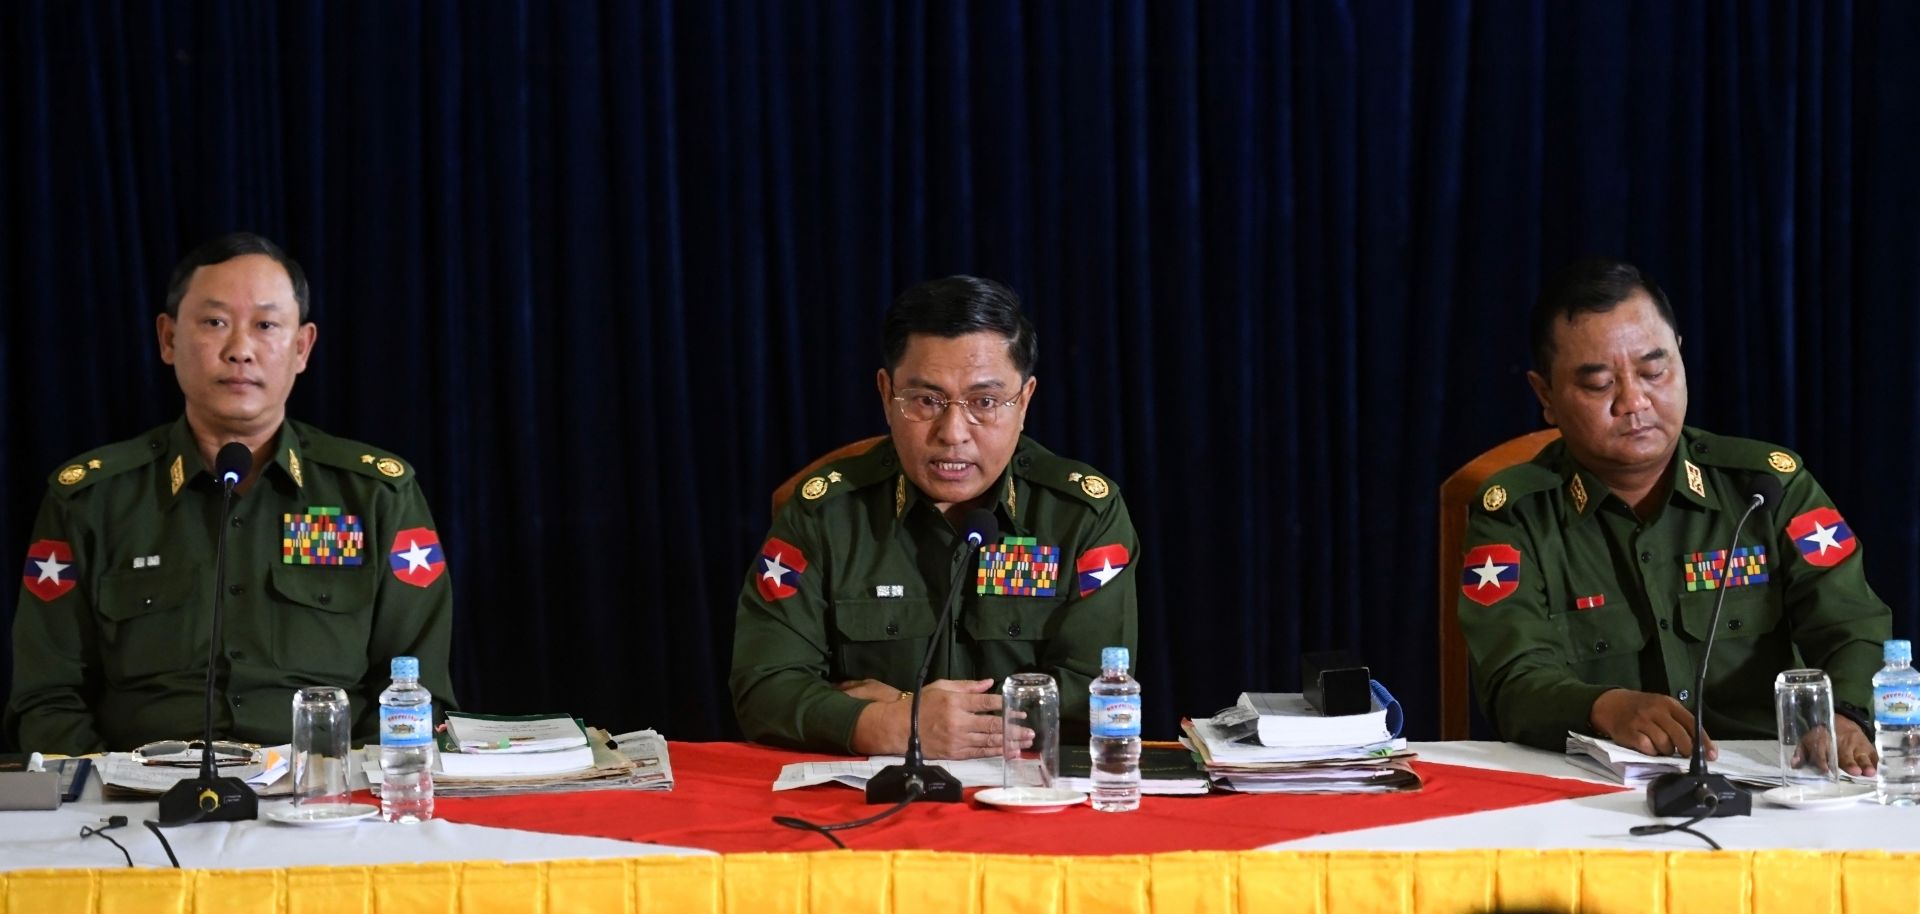 Myanmar army generals Tun Tun Nyi, Soe Naing Oo and Zaw Min Tun (left to right) discuss their intent to thwart constitutional changes by the governing National League for Democracy.